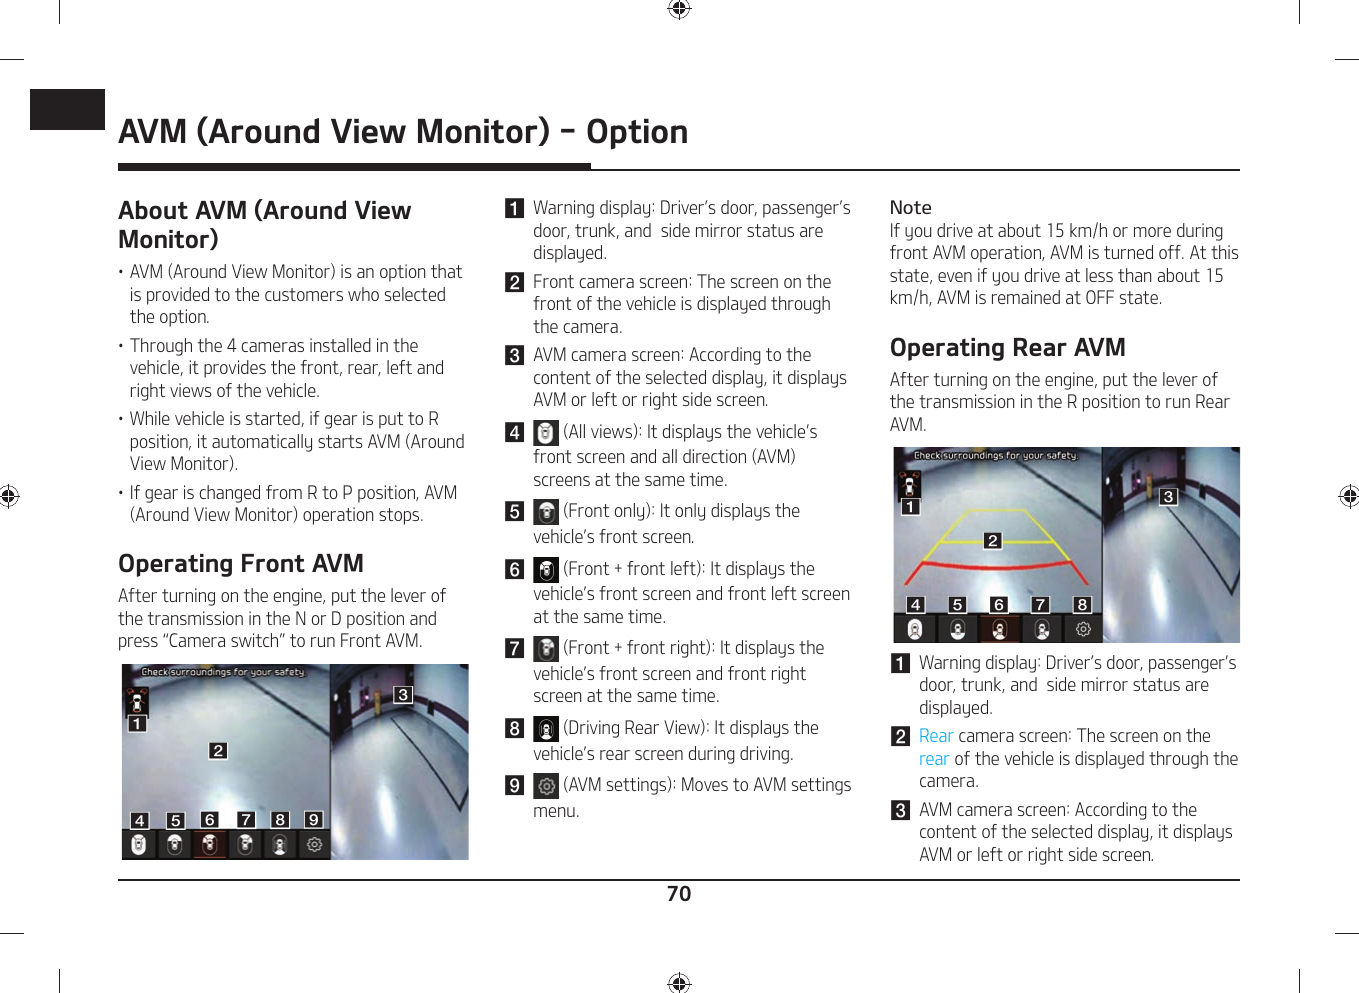 70AVM (Around View Monitor) - OptionAbout AVM (Around View Monitor)䳜 AVM (Around View Monitor) is an option that is provided to the customers who selected the option.䳜 Through the 4 cameras installed in the vehicle, it provides the front, rear, left and right views of the vehicle.䳜 While vehicle is started, if gear is put to R position, it automatically starts AVM (Around View Monitor).䳜 If gear is changed from R to P position, AVM (Around View Monitor) operation stops.Operating Front AVMAfter turning on the engine, put the lever of the transmission in the N or D position and press 䳖Camera switch䳗 to run Front AVM.ddeeffgghhaabbcciia Warning display: Driver䳓s door, passenger䳓s door, trunk, and  side mirror status are displayed.b  Front camera screen: The screen on the front of the vehicle is displayed through the camera.c  AVM camera screen: According to the content of the selected display, it displays AVM or left or right side screen.d  (All views): It displays the vehicle䳓s front screen and all direction (AVM) screens at the same time.e  (Front only): It only displays the vehicle䳓s front screen.f  (Front + front left): It displays the vehicle䳓s front screen and front left screen at the same time.g  (Front + front right): It displays the vehicle䳓s front screen and front right screen at the same time.h  (Driving Rear View): It displays the vehicle䳓s rear screen during driving.i  (AVM settings): Moves to AVM settings menu.NoteIf you drive at about 15 km/h or more during front AVM operation, AVM is turned off. At this state, even if you drive at less than about 15 km/h, AVM is remained at OFF state.Operating Rear AVMAfter turning on the engine, put the lever of the transmission in the R position to run Rear AVM.ddeeffgghhaabbcca Warning display: Driver䳓s door, passenger䳓s door, trunk, and  side mirror status are displayed.b Rear camera screen: The screen on the rear of the vehicle is displayed through the camera.c AVM camera screen: According to the content of the selected display, it displays AVM or left or right side screen.AVM (Around View Monitor) - Option